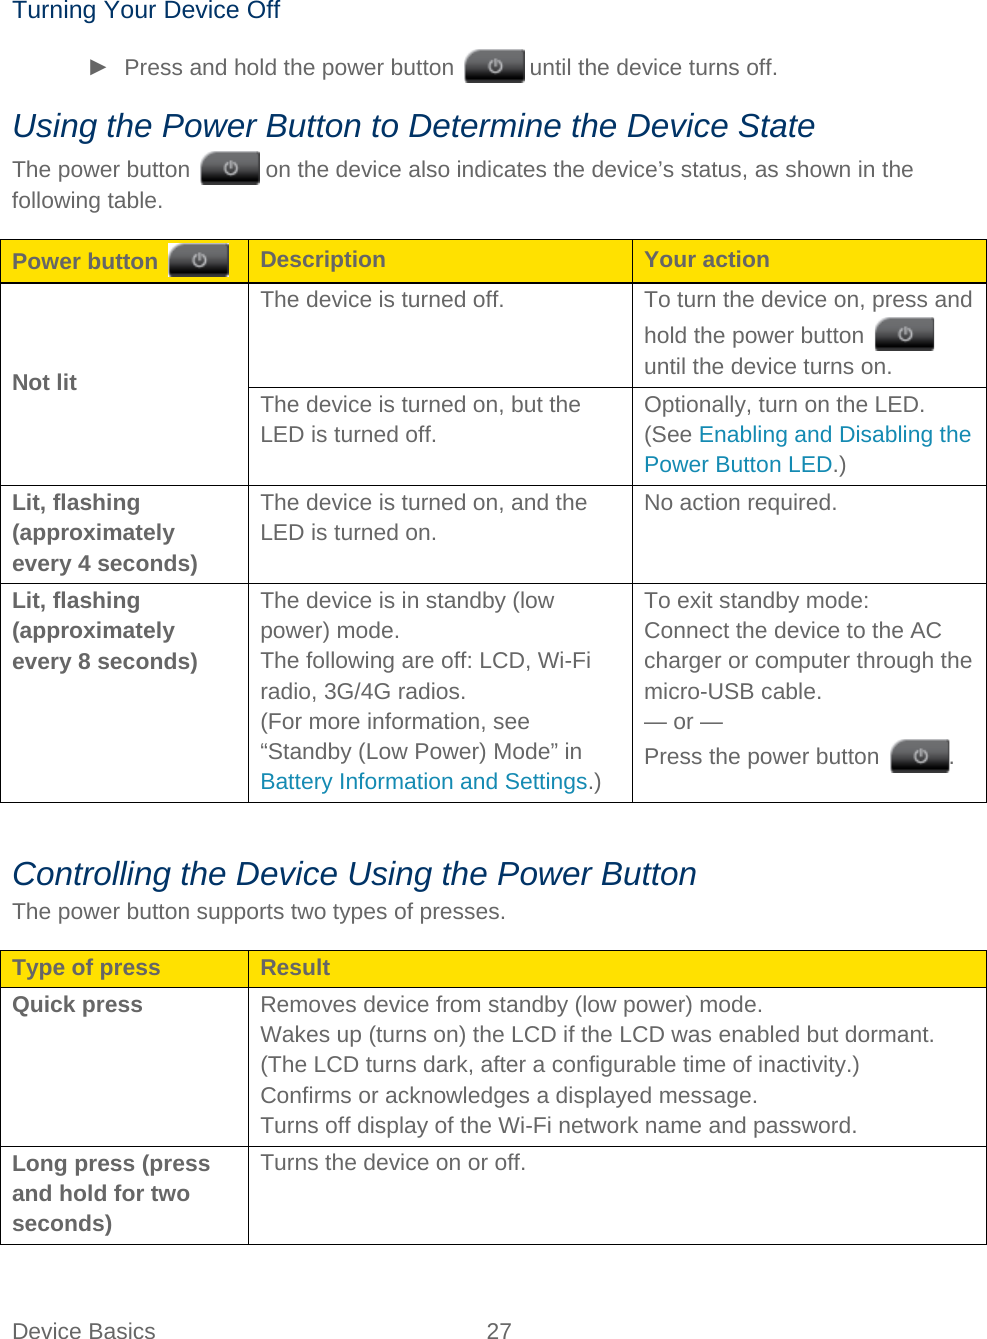 Device Basics 27    Turning Your Device Off ► Press and hold the power button   until the device turns off. Using the Power Button to Determine the Device State The power button   on the device also indicates the device’s status, as shown in the following table. Power button   Description Your action Not lit The device is turned off. To turn the device on, press and hold the power button   until the device turns on. The device is turned on, but the LED is turned off. Optionally, turn on the LED. (See Enabling and Disabling the Power Button LED.) Lit, flashing (approximately every 4 seconds) The device is turned on, and the LED is turned on. No action required. Lit, flashing (approximately every 8 seconds) The device is in standby (low power) mode. The following are off: LCD, Wi-Fi radio, 3G/4G radios. (For more information, see “Standby (Low Power) Mode” in Battery Information and Settings.) To exit standby mode: Connect the device to the AC charger or computer through the micro-USB cable. — or — Press the power button  .  Controlling the Device Using the Power Button The power button supports two types of presses. Type of press Result Quick press Removes device from standby (low power) mode. Wakes up (turns on) the LCD if the LCD was enabled but dormant. (The LCD turns dark, after a configurable time of inactivity.) Confirms or acknowledges a displayed message. Turns off display of the Wi-Fi network name and password. Long press (press and hold for two seconds) Turns the device on or off.  